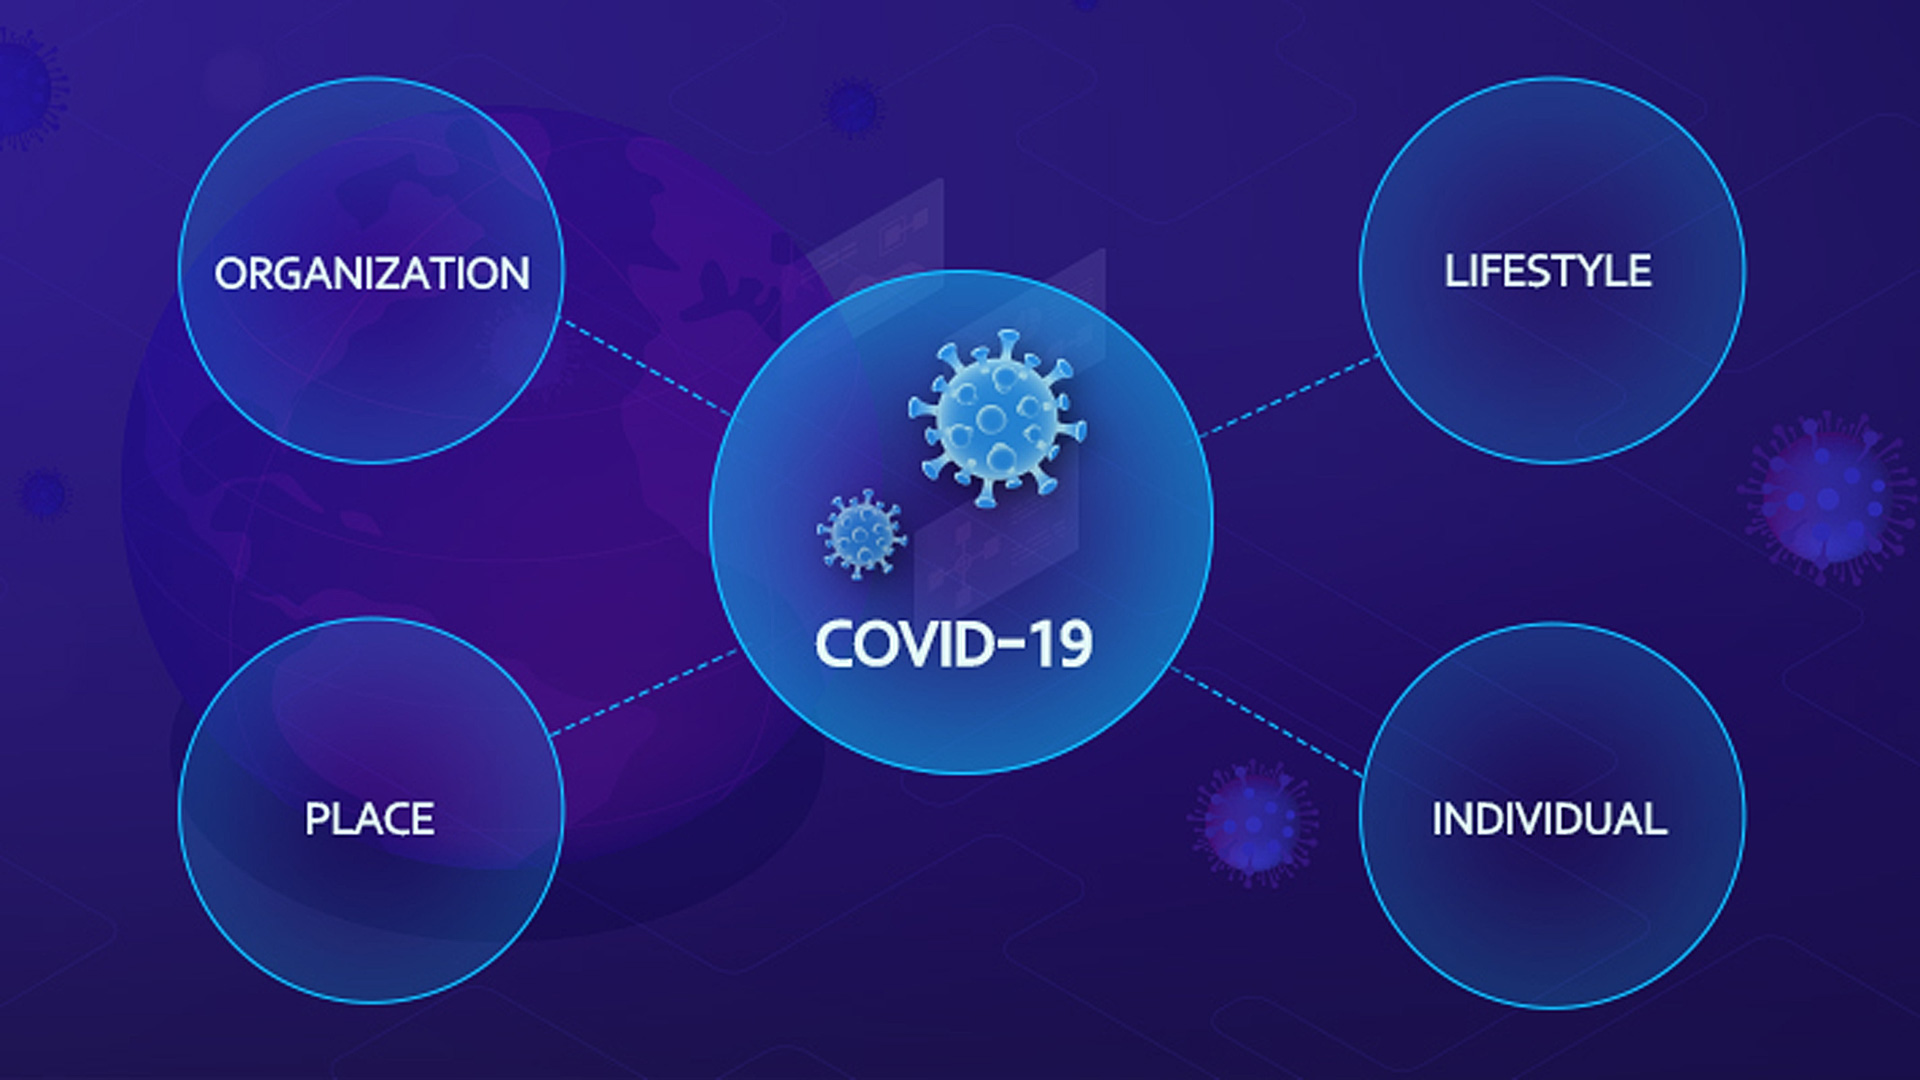 COVID-19 affecting individual organization place and areas of lifestyle